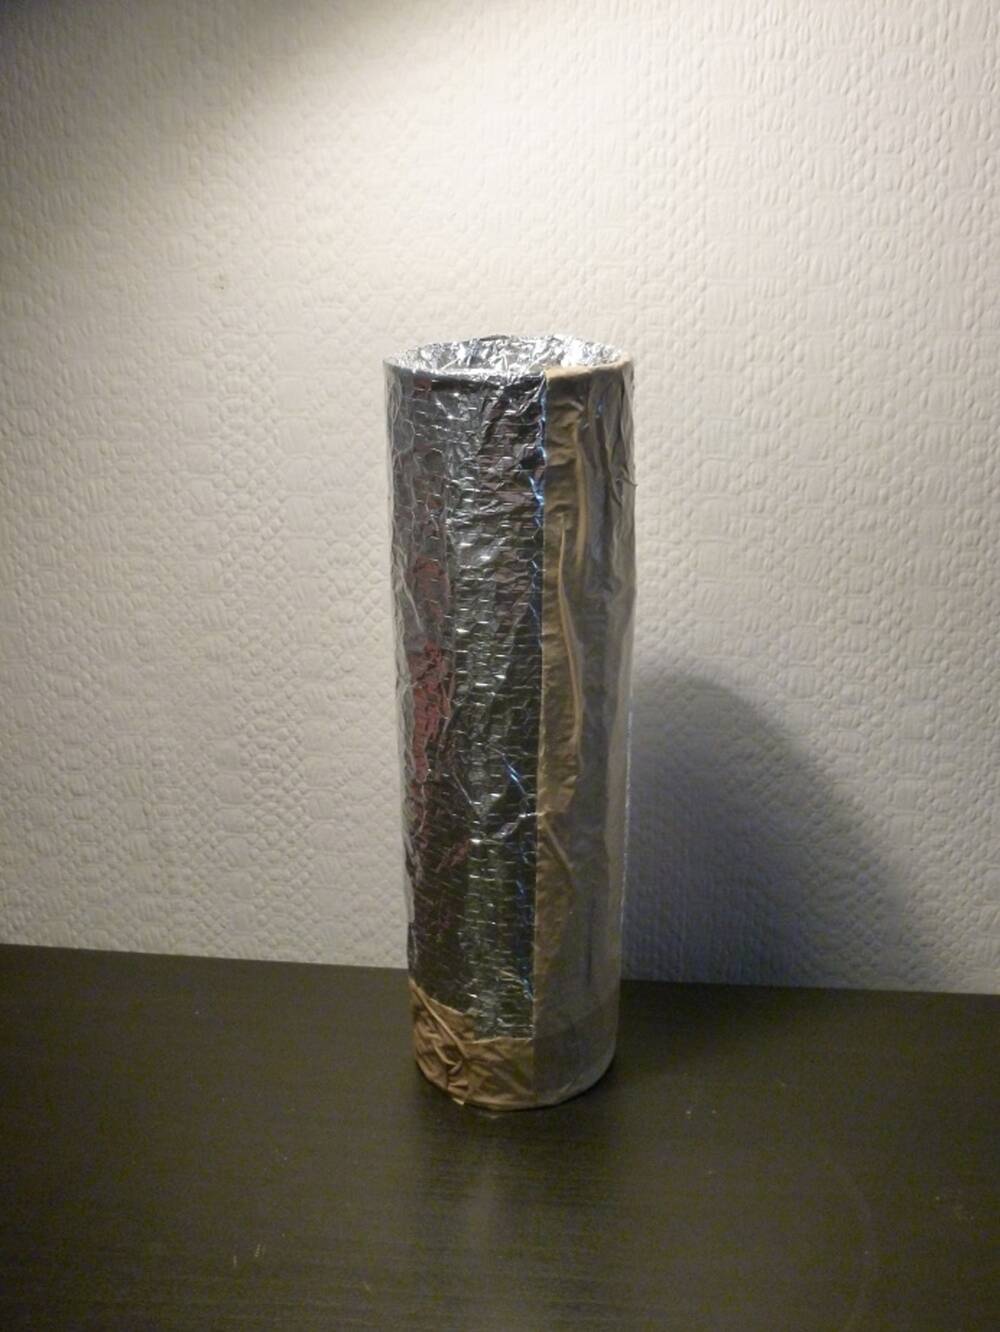 A Pringles tube wrapped in foil, on a black table.